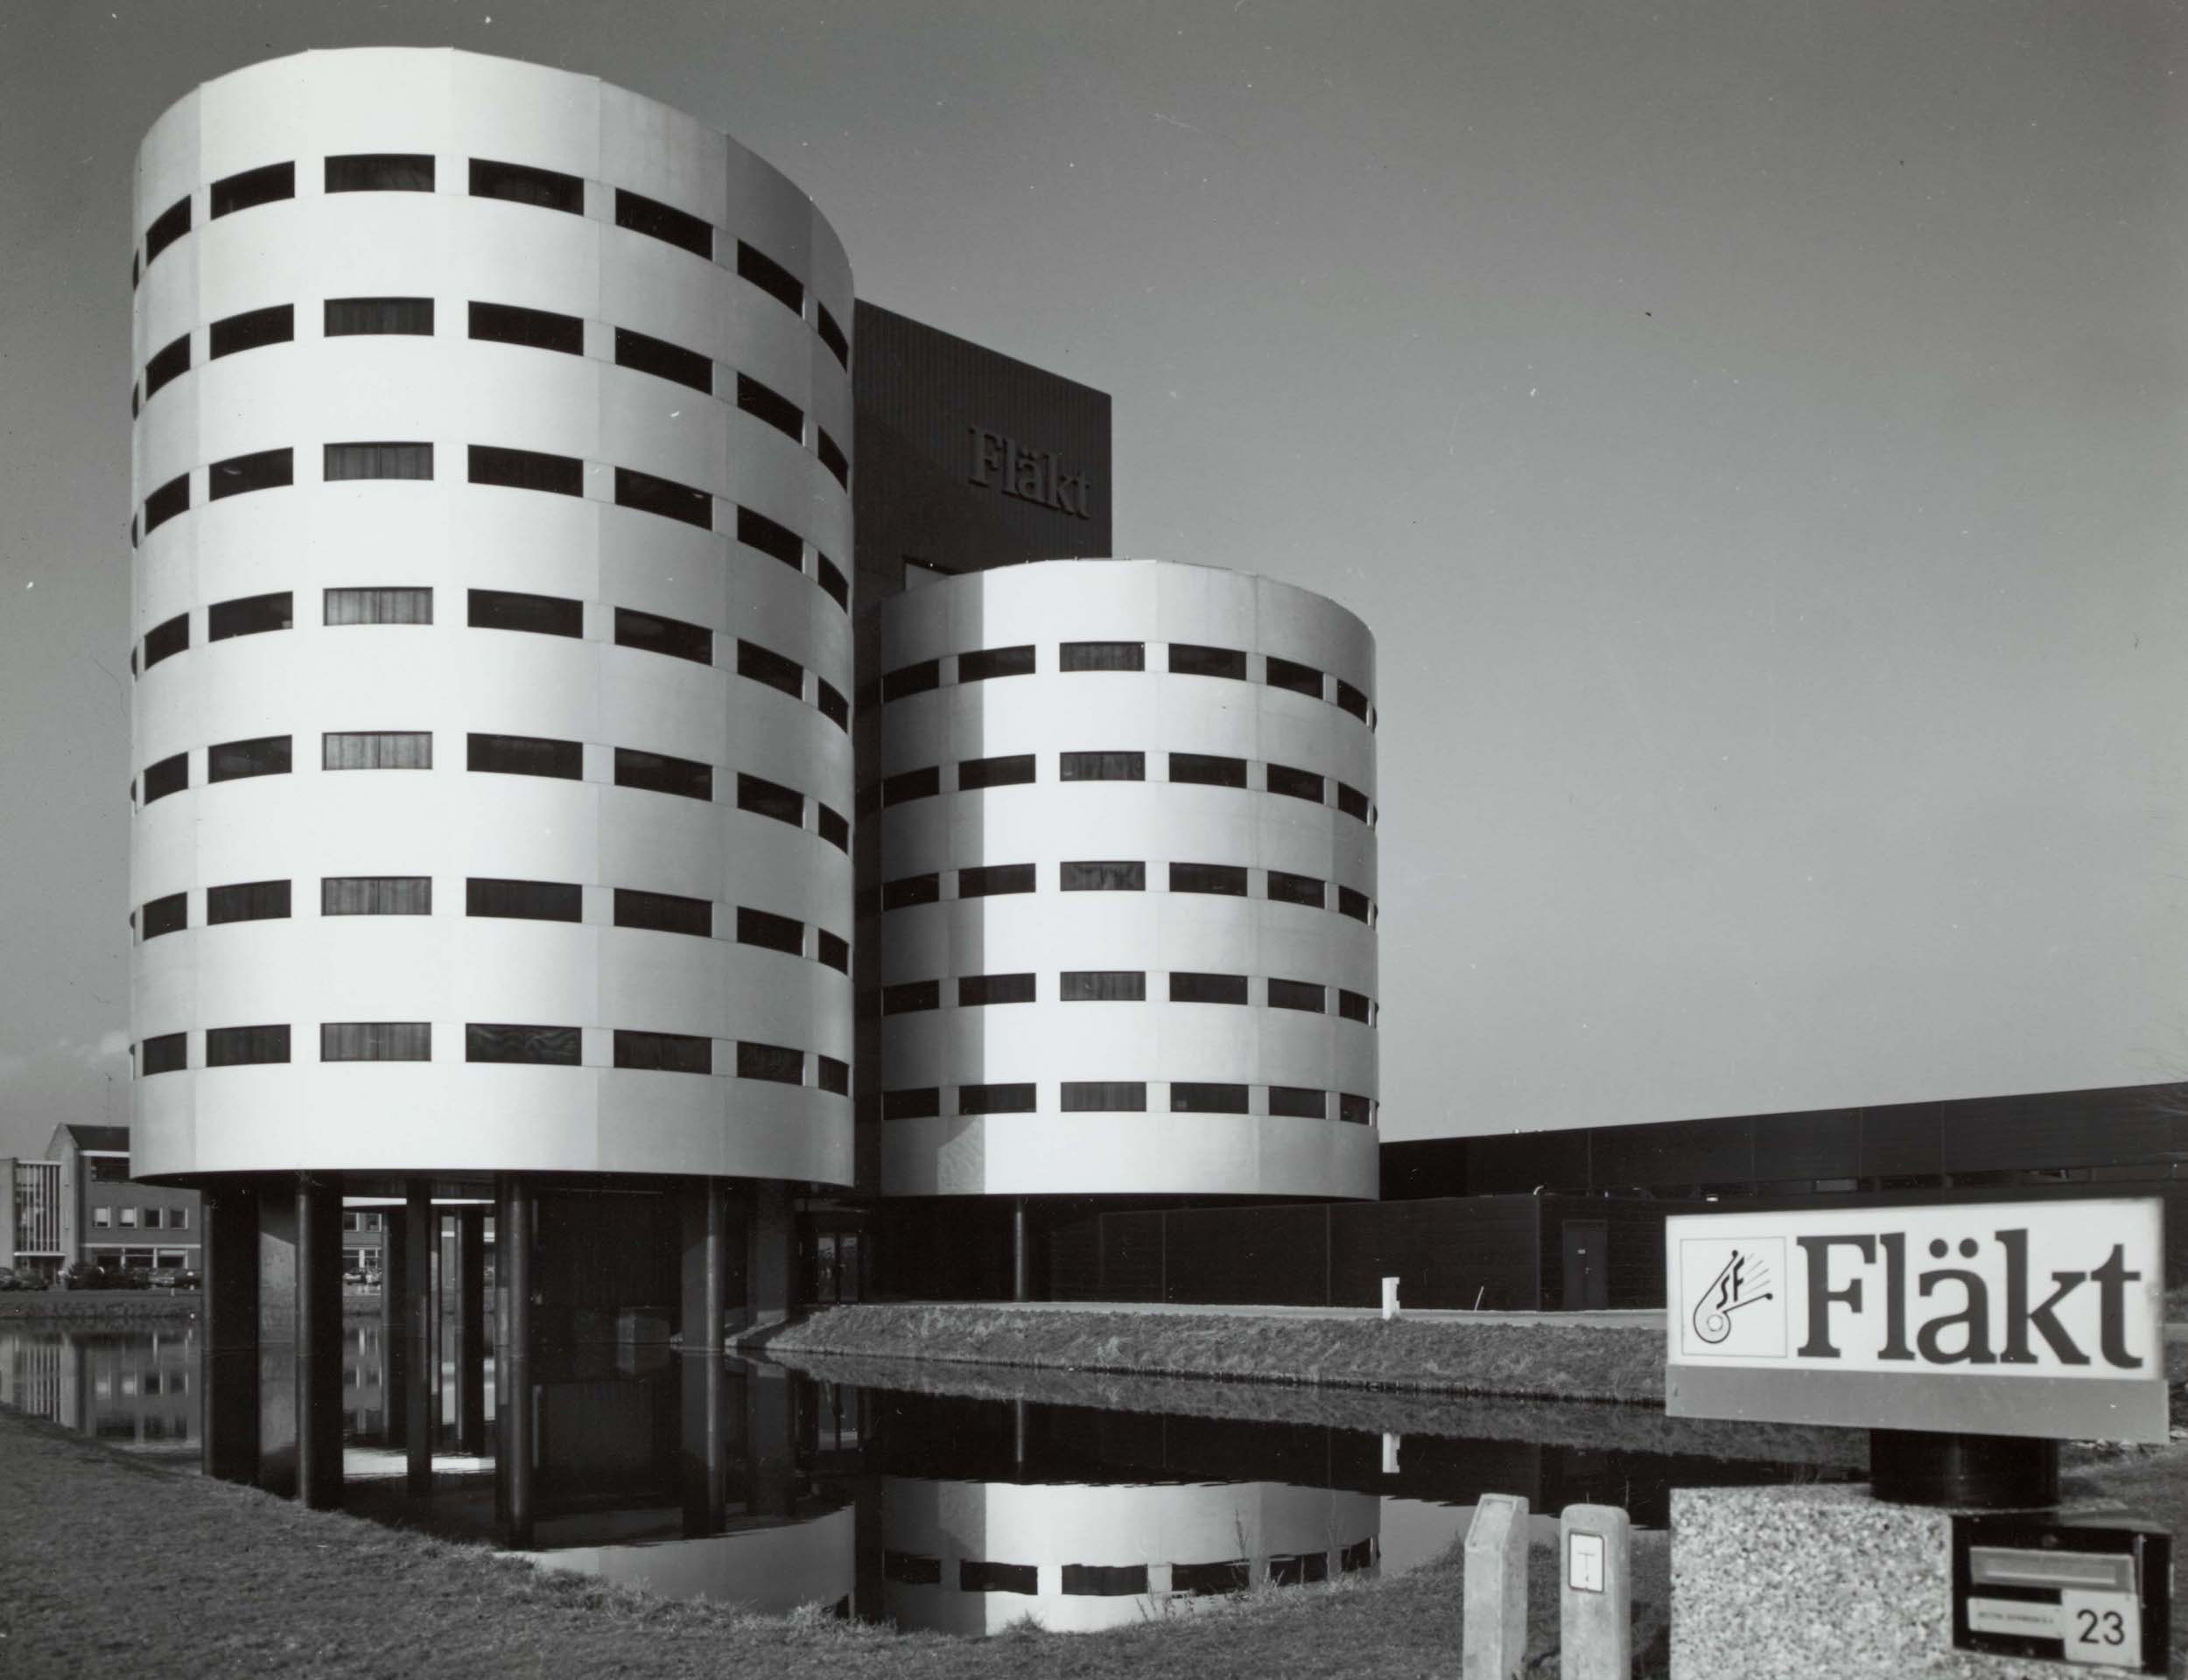 Refläkt - SF Fläkt headquarters 1974 - a project by Space Encounters Office for Architecture